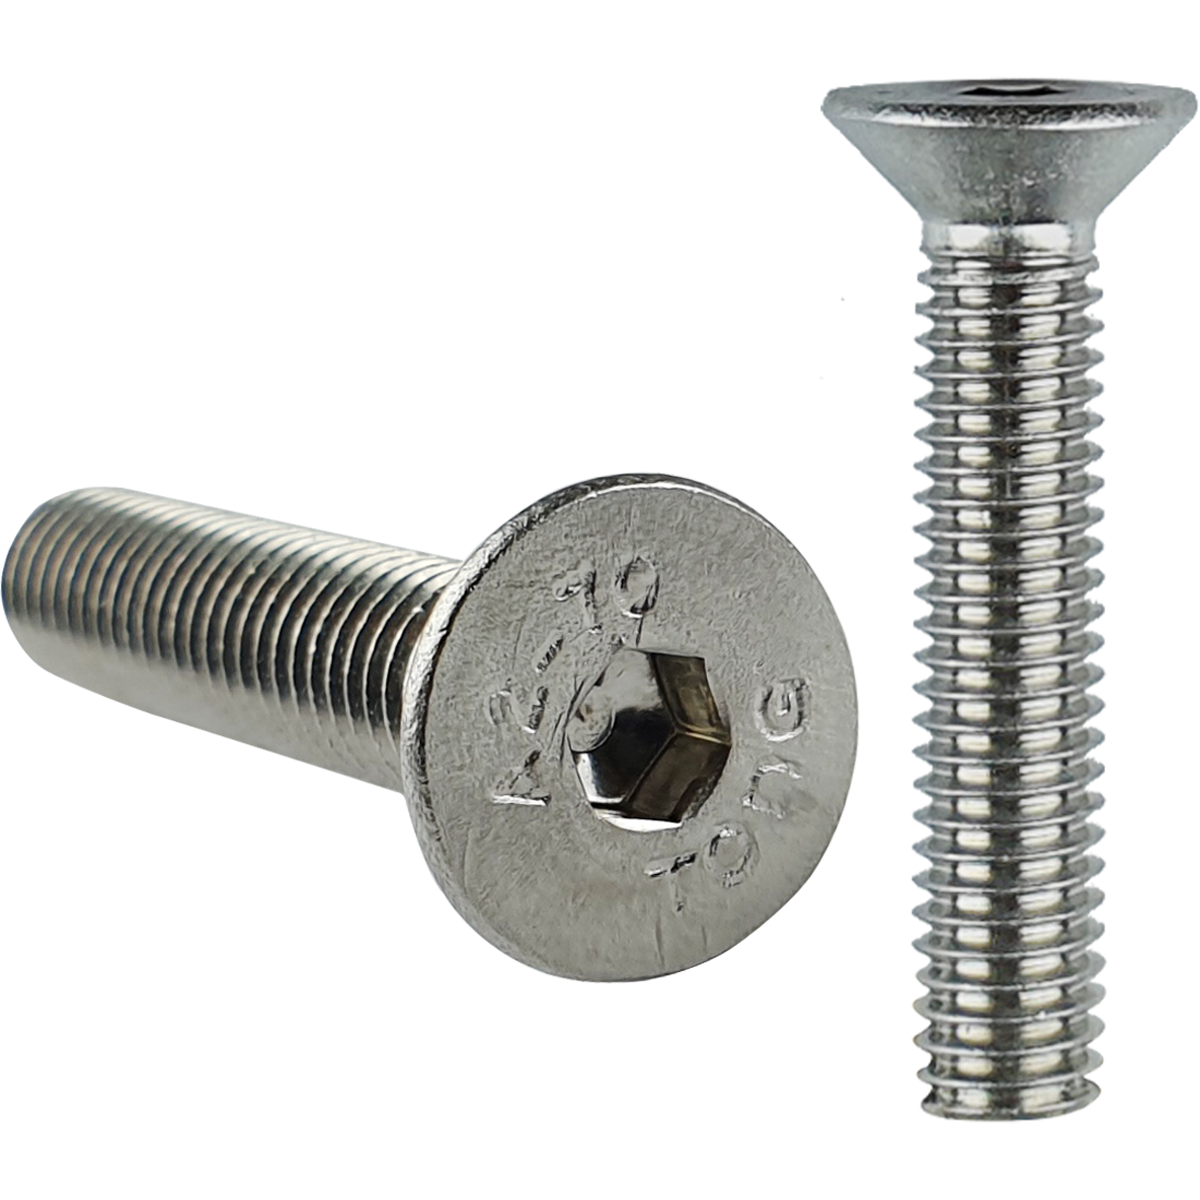 UNF countersunk machine screws with a hex recess manufactured from A2 stainless steel that offer a high level of corrosion resistance.